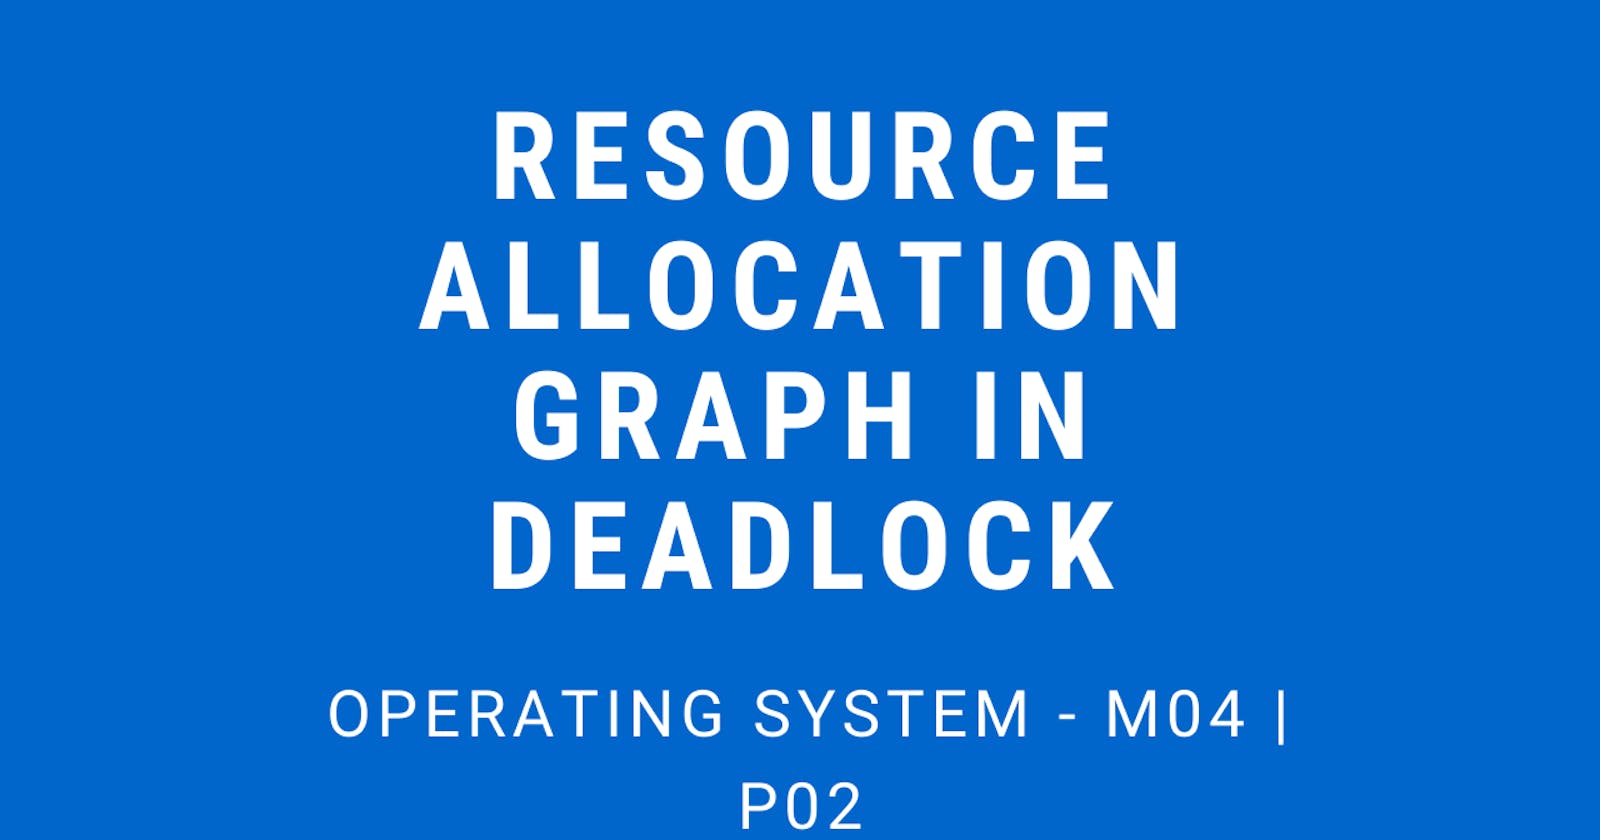 Resource Allocation Graph in Deadlock | Operating System - M04 P02